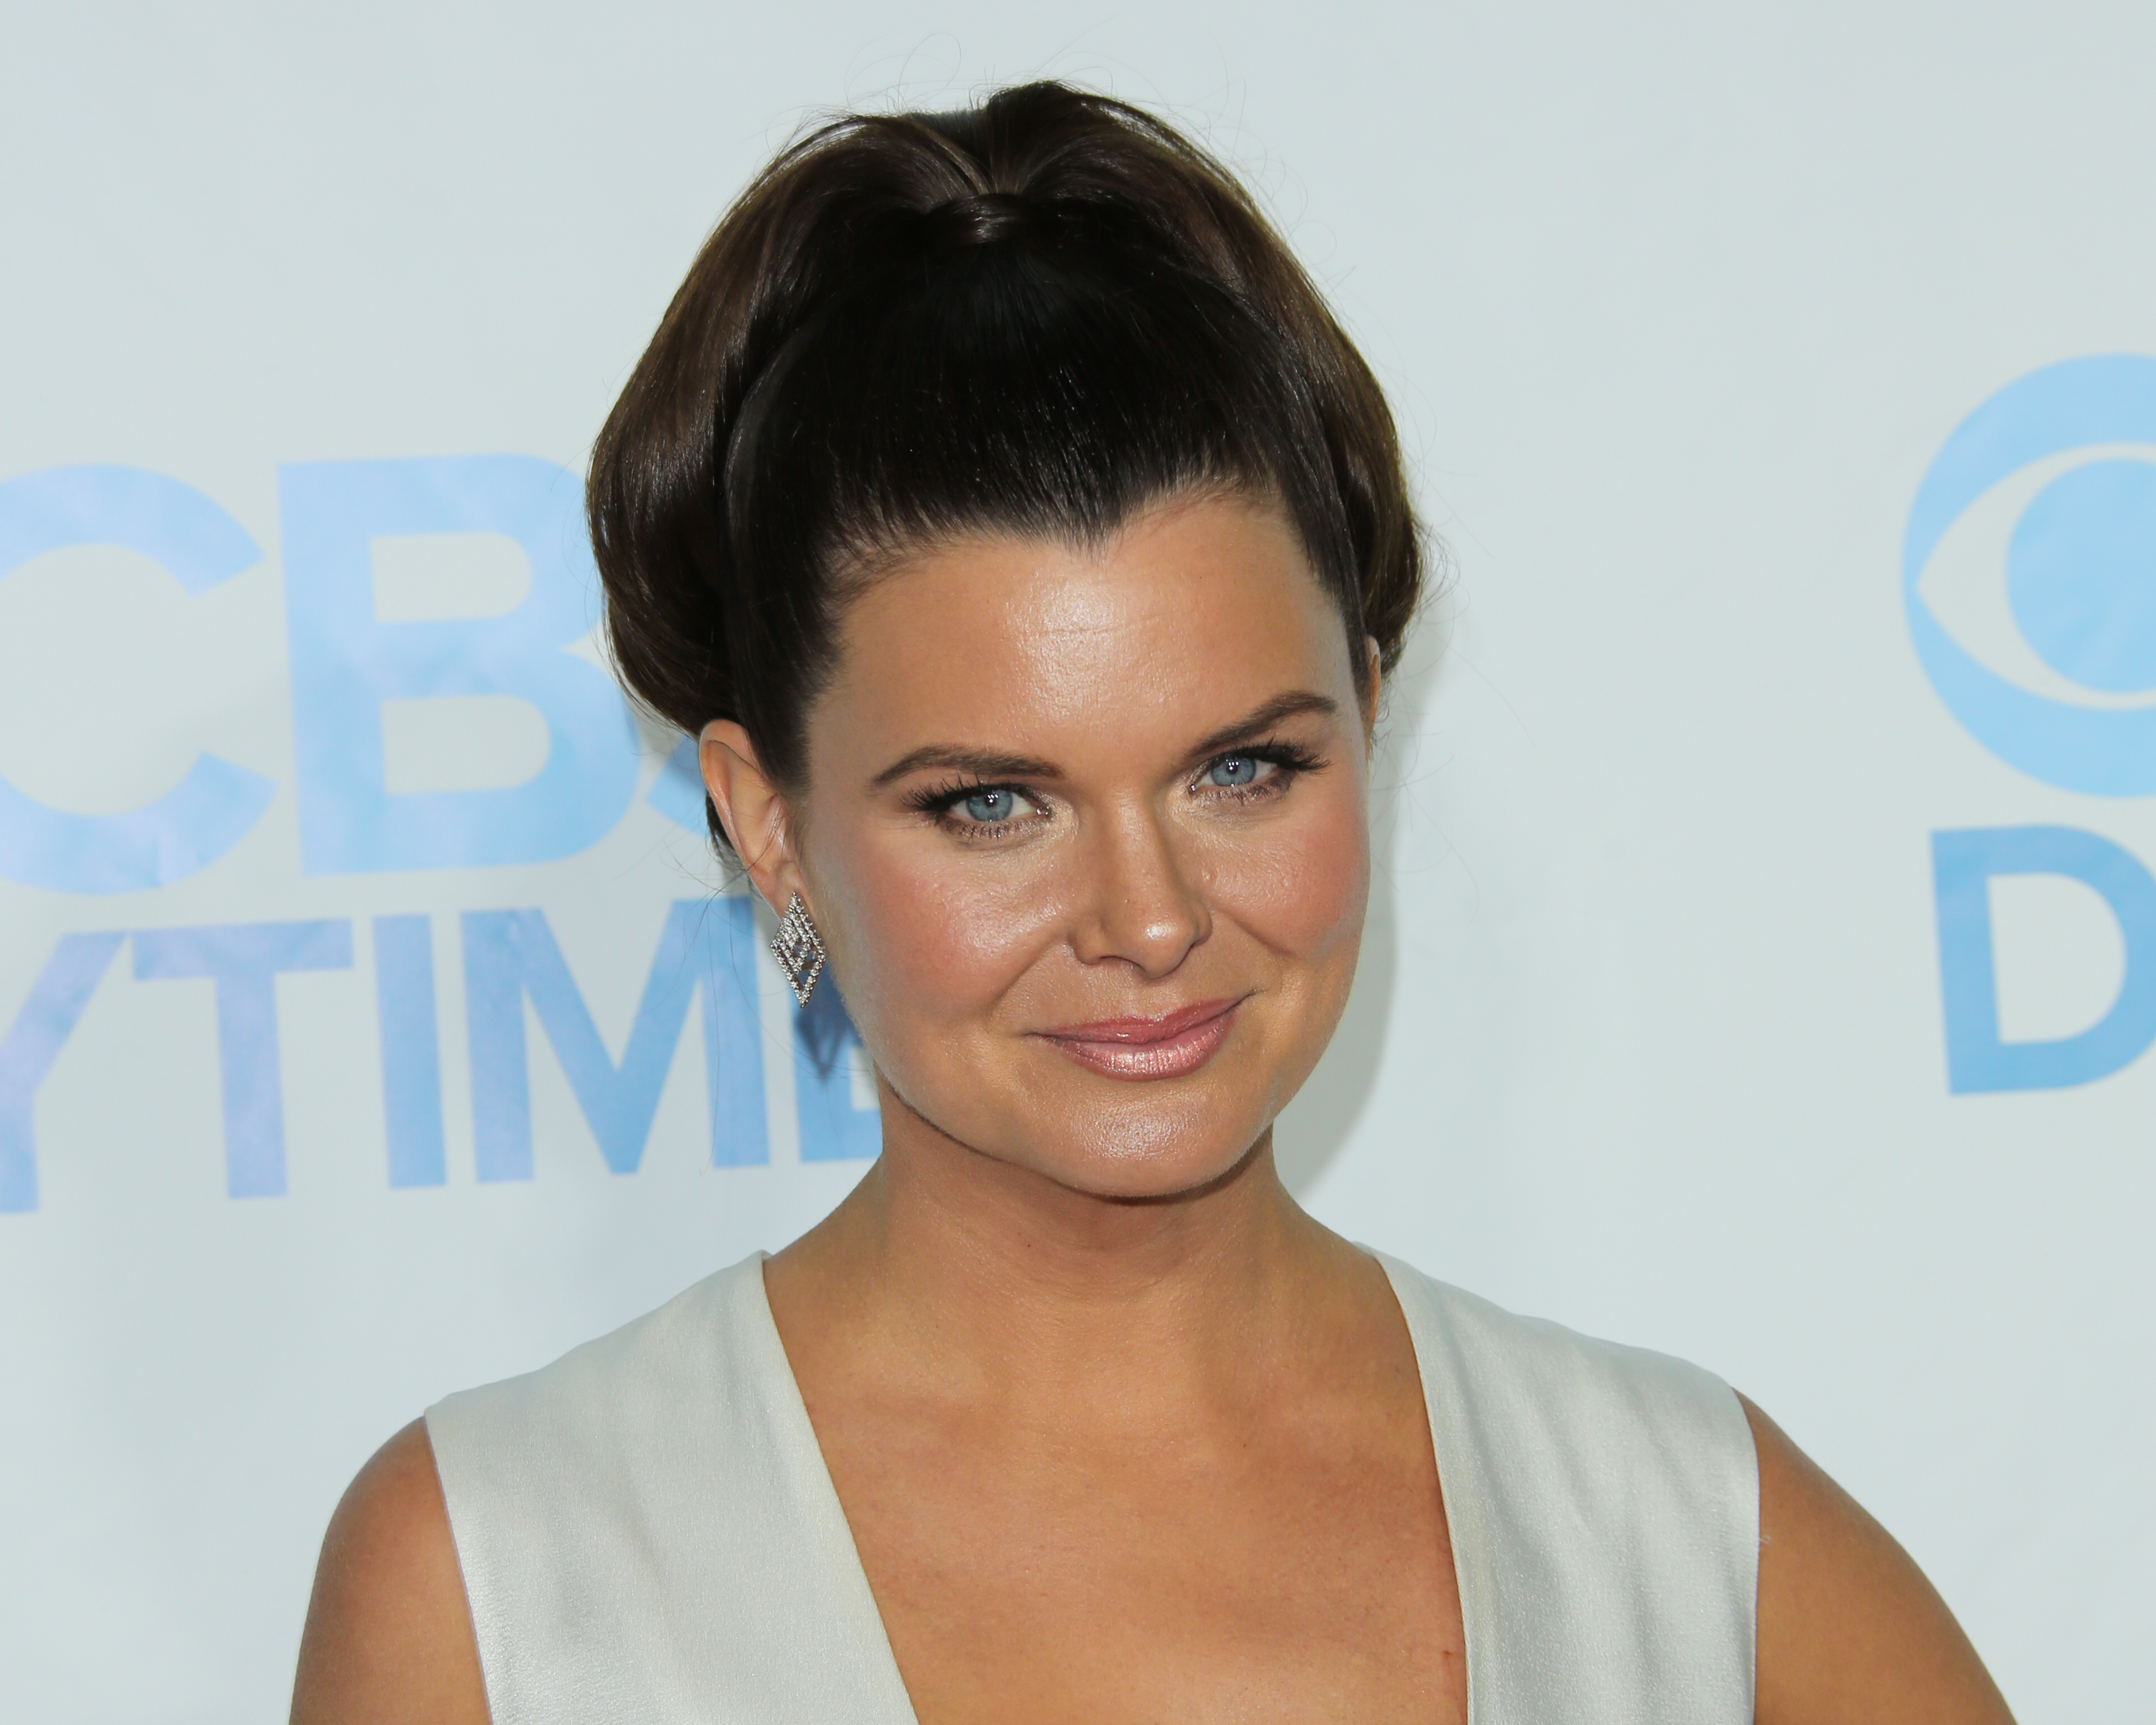 'The Bold and the Beautiful' actor Heather Tom wears a white dress and poses for photographers on the red carpet.